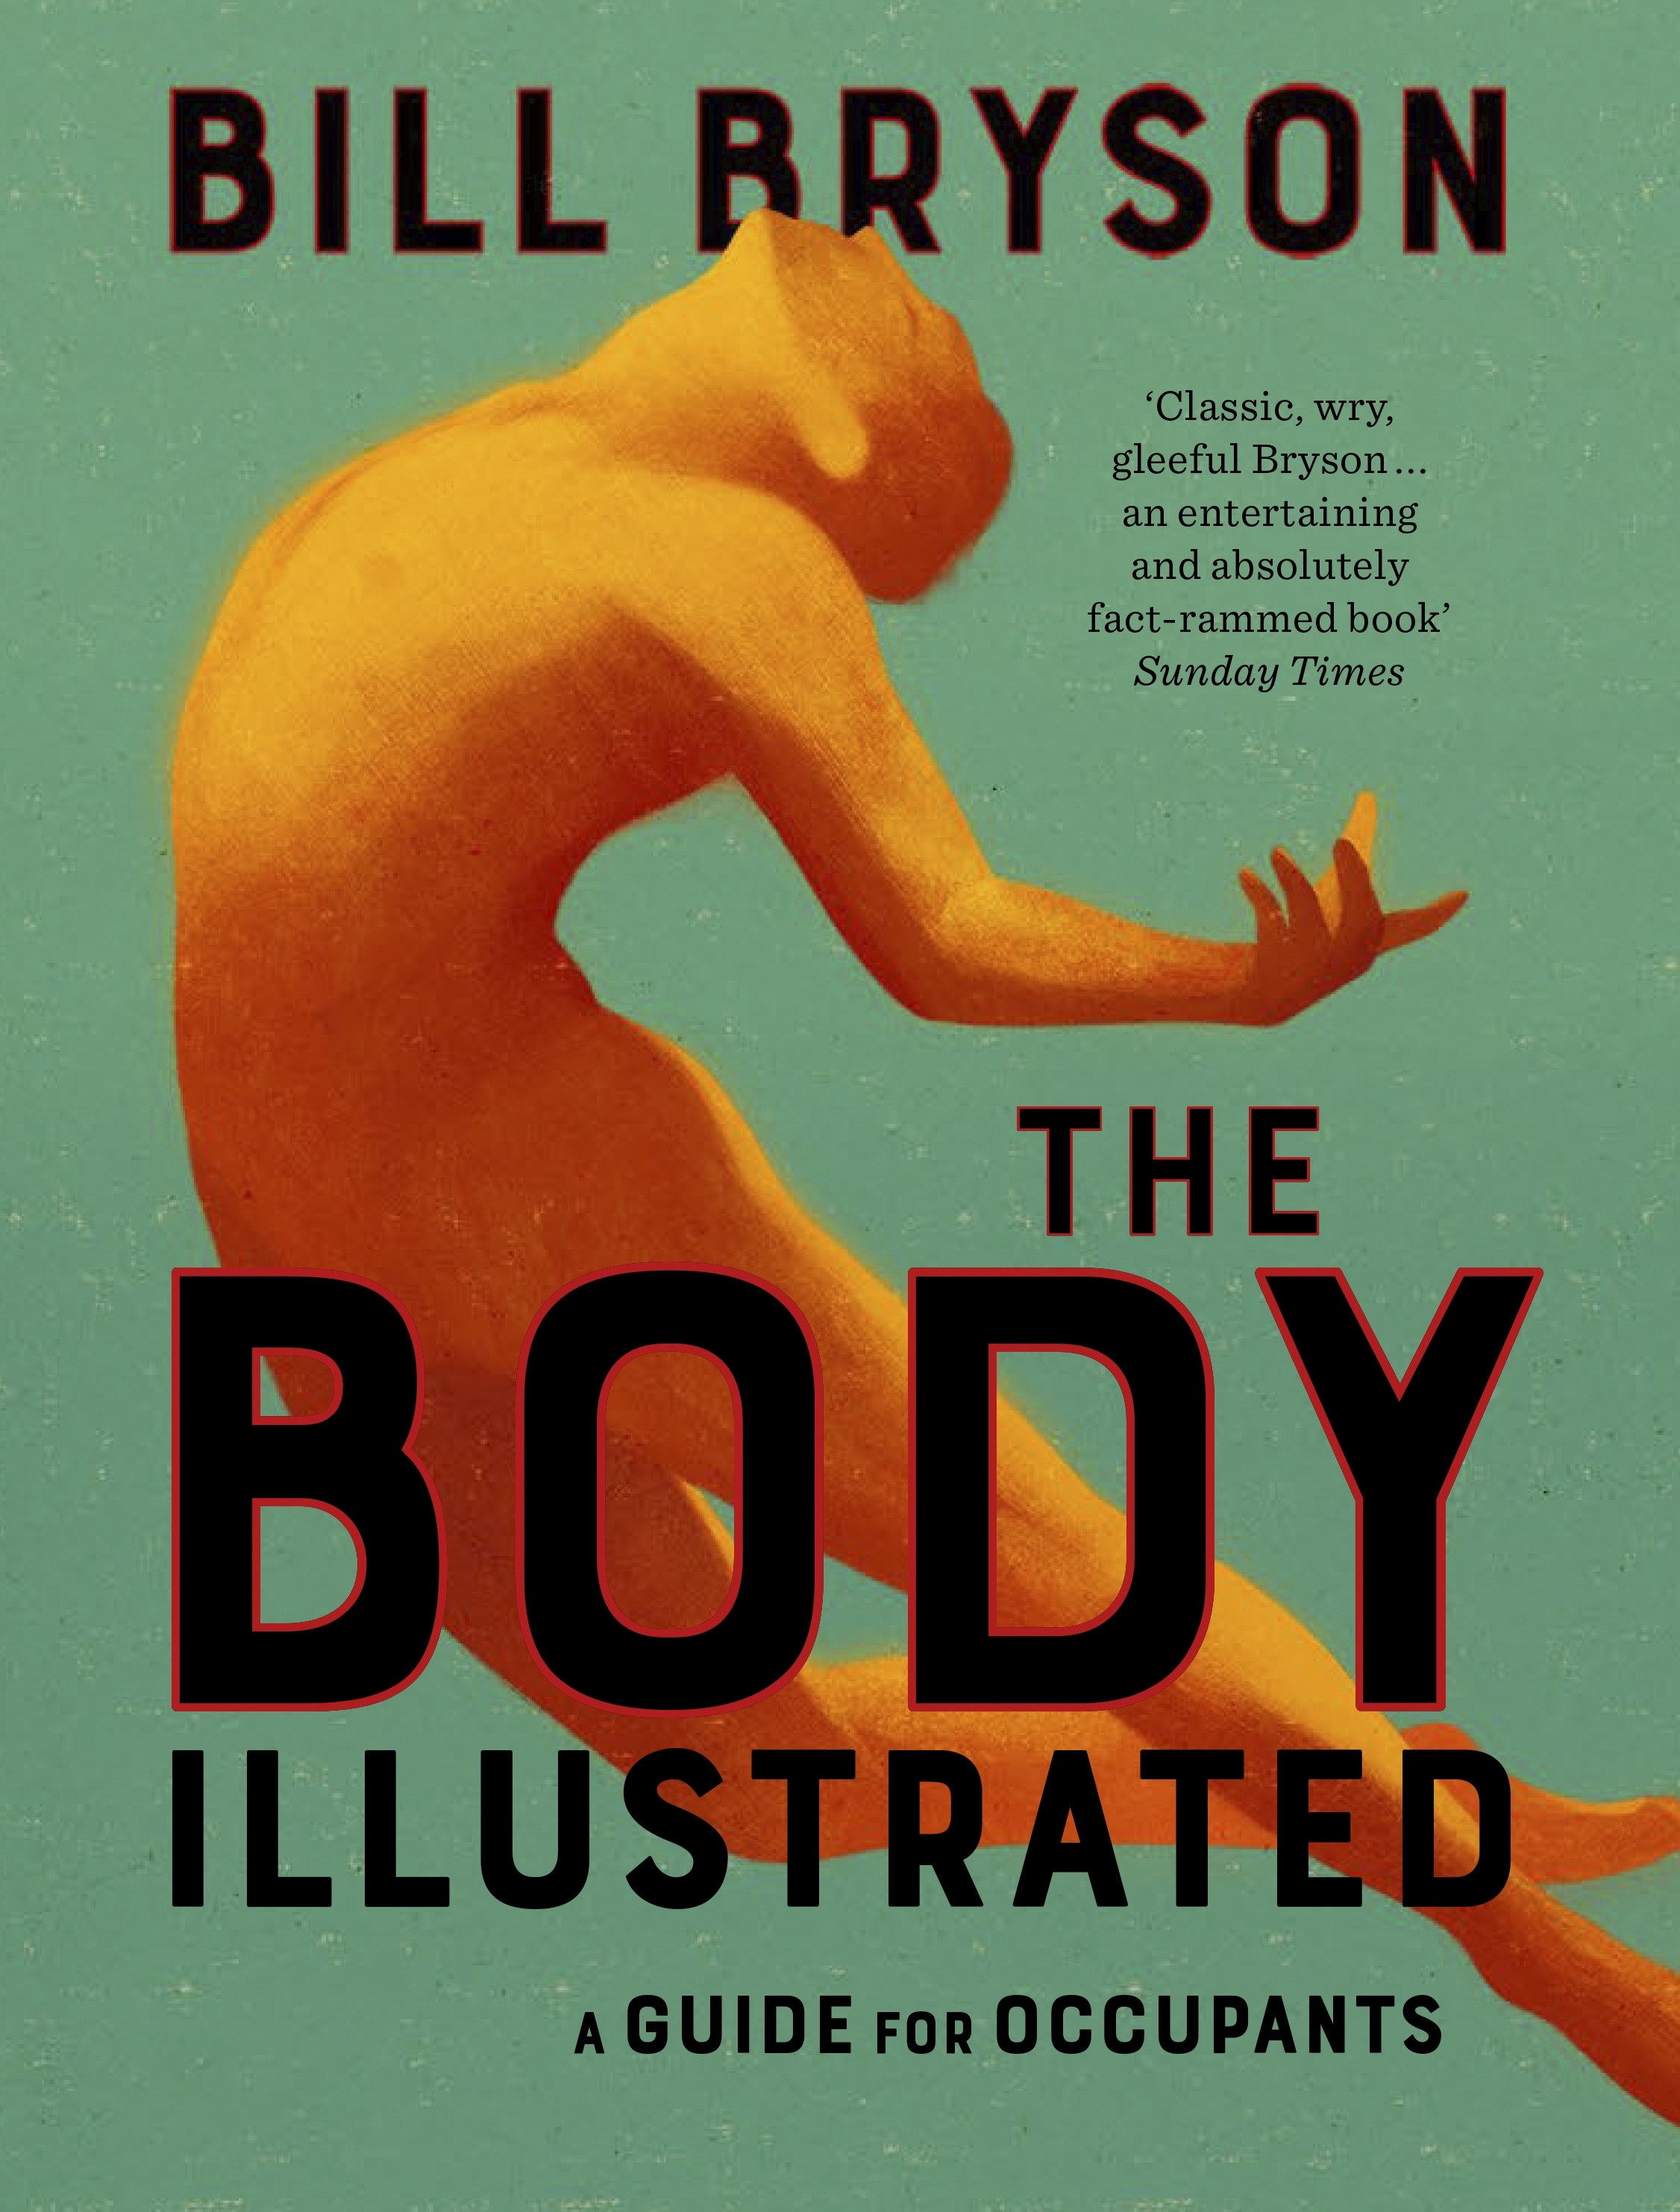 Book “THE BODY — ILLUSTRATED” by Bill Bryson — September 29, 2022